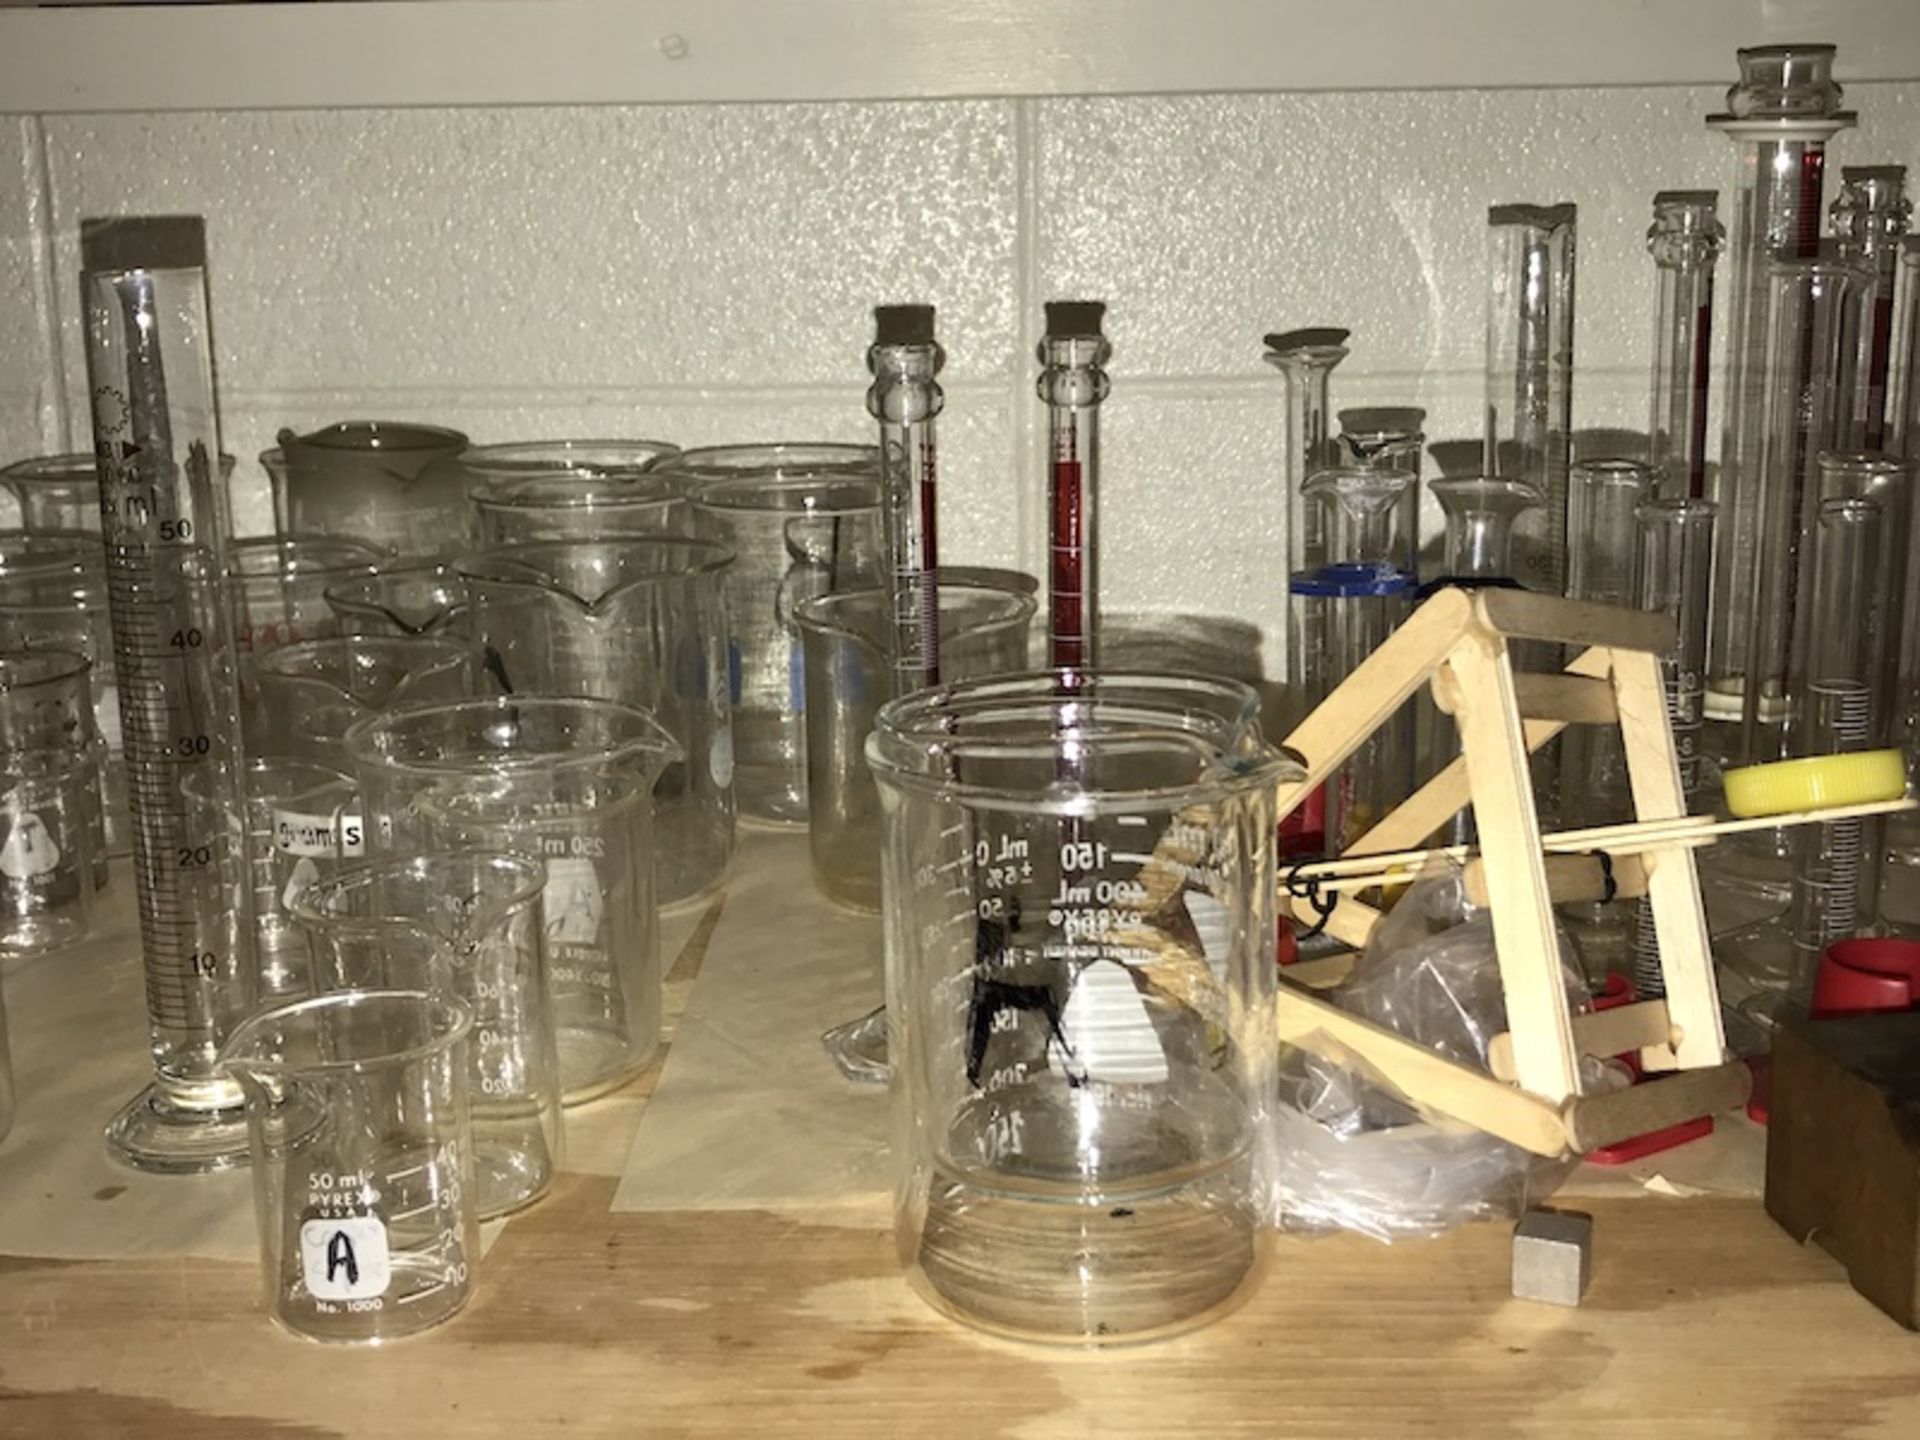 Lot of Misc. Glassware (Room 309) - Image 5 of 9